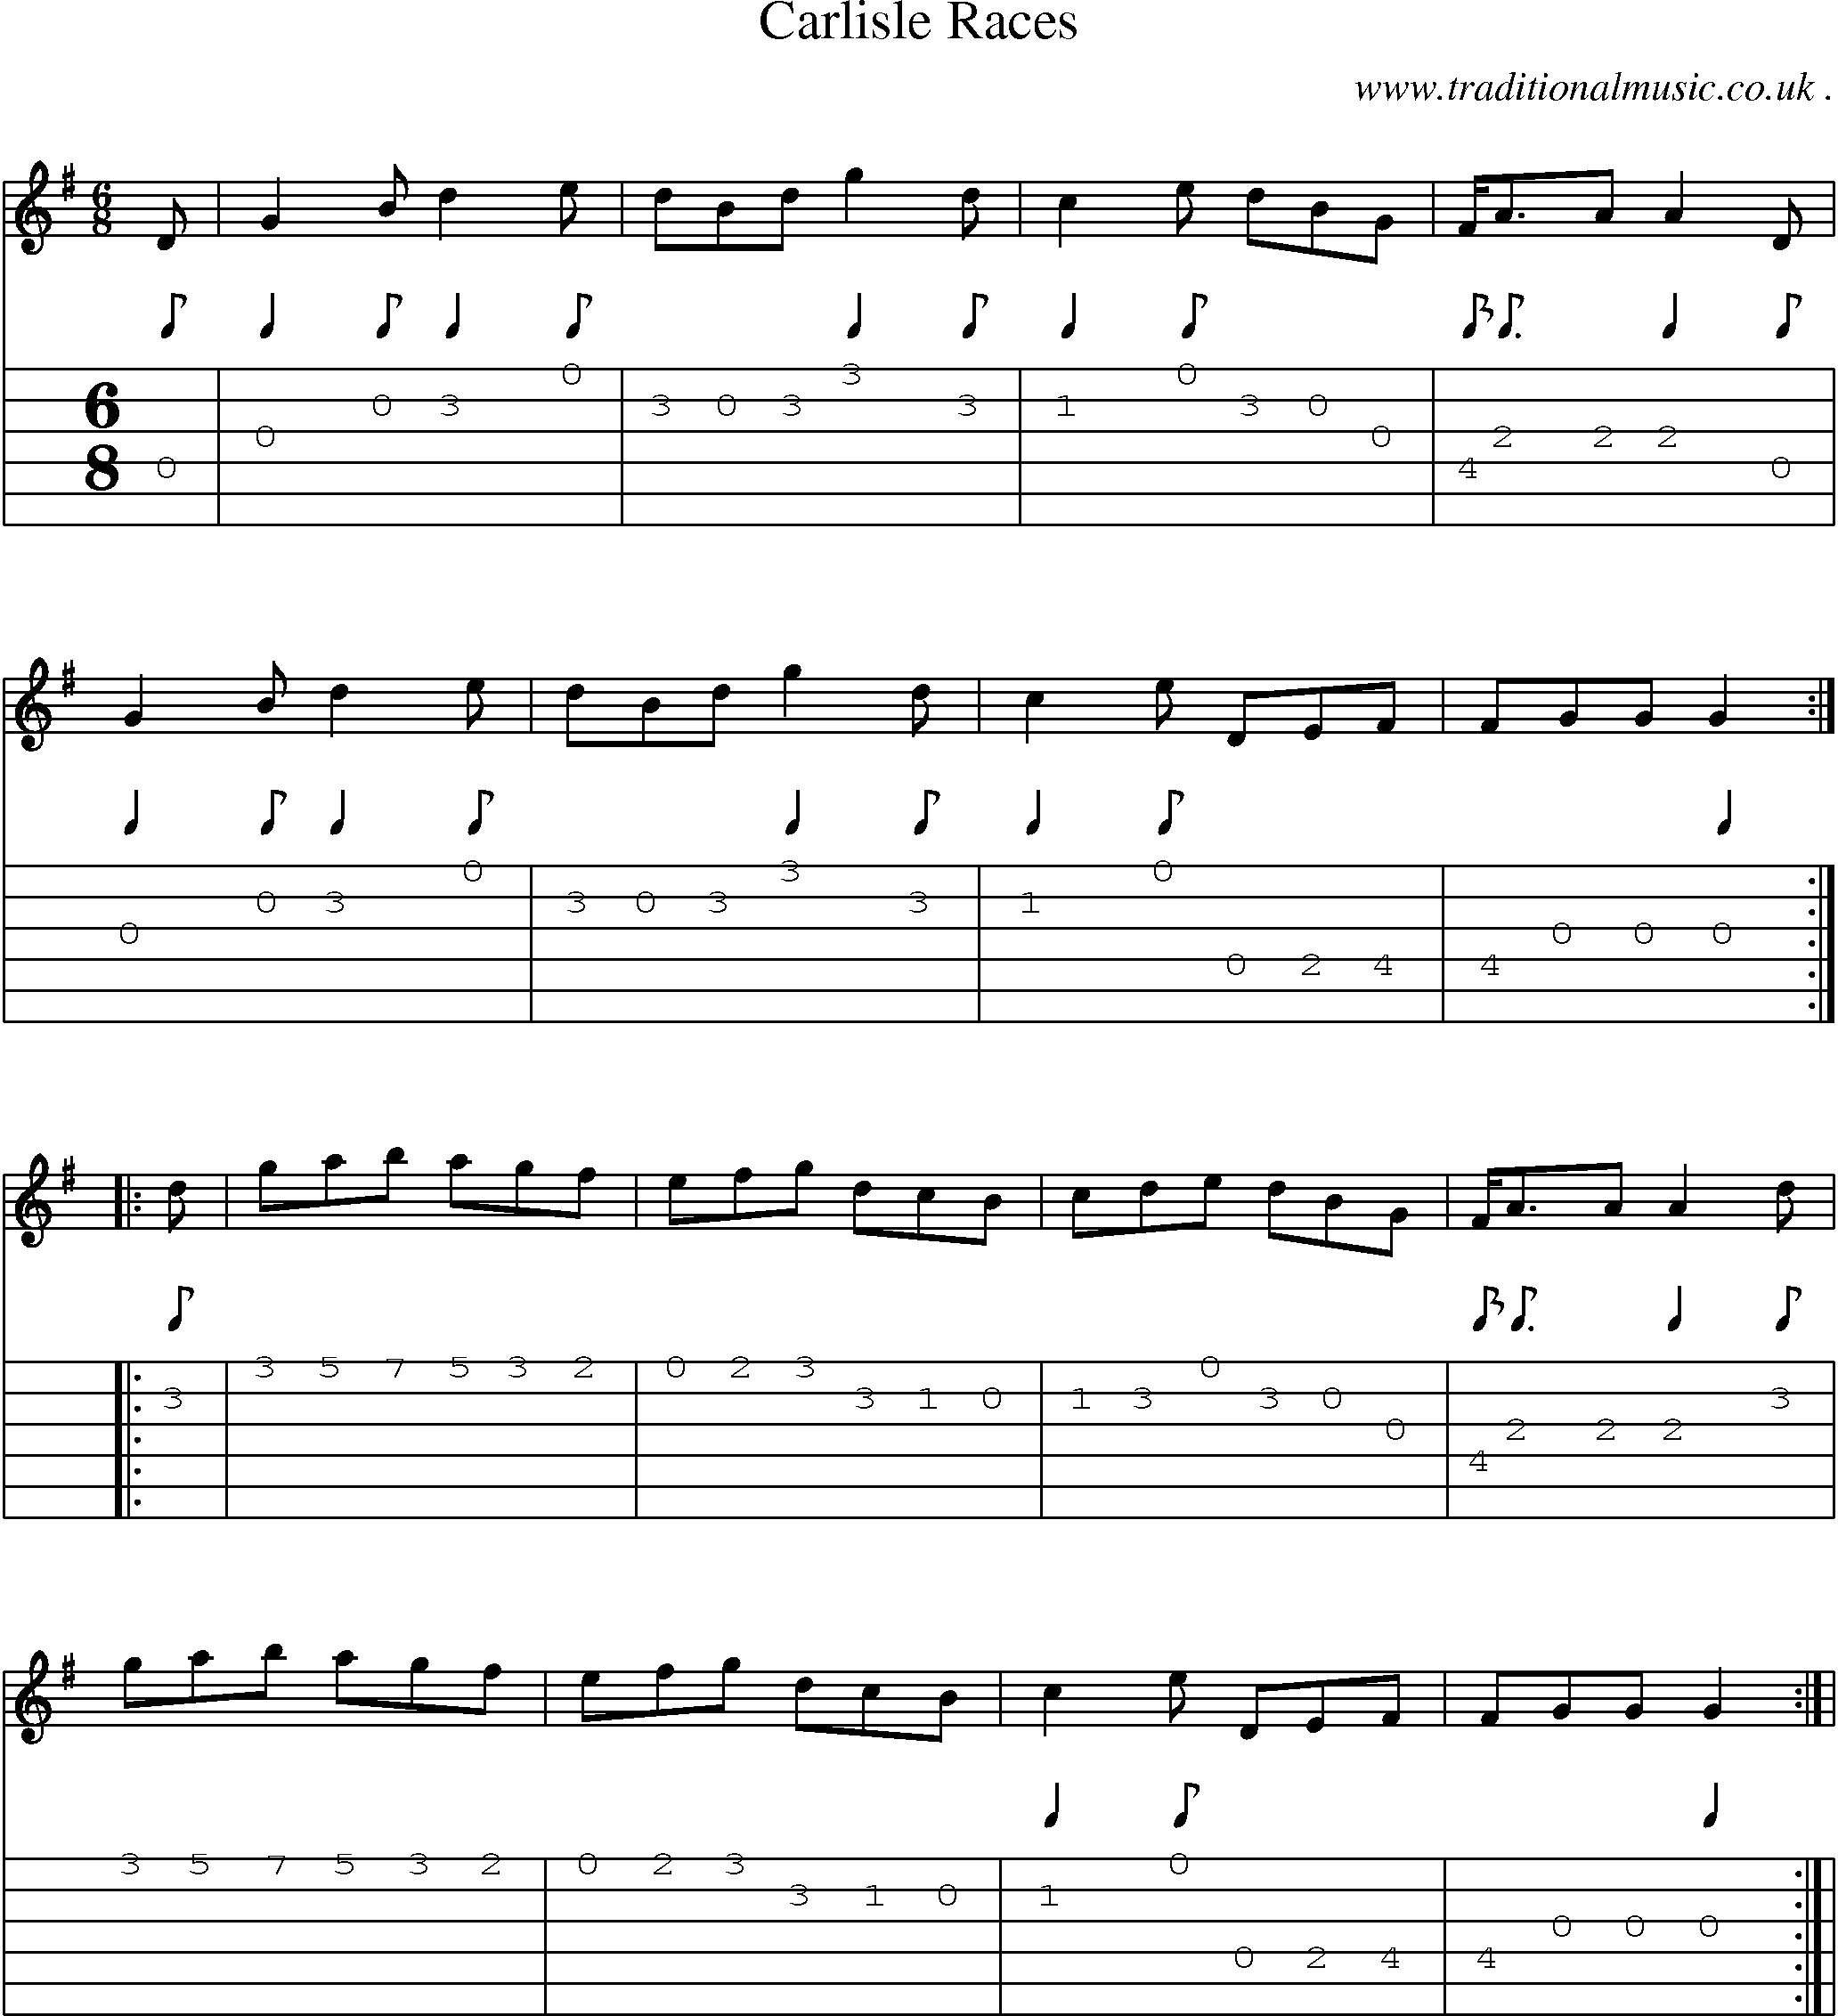 Sheet-Music and Guitar Tabs for Carlisle Races